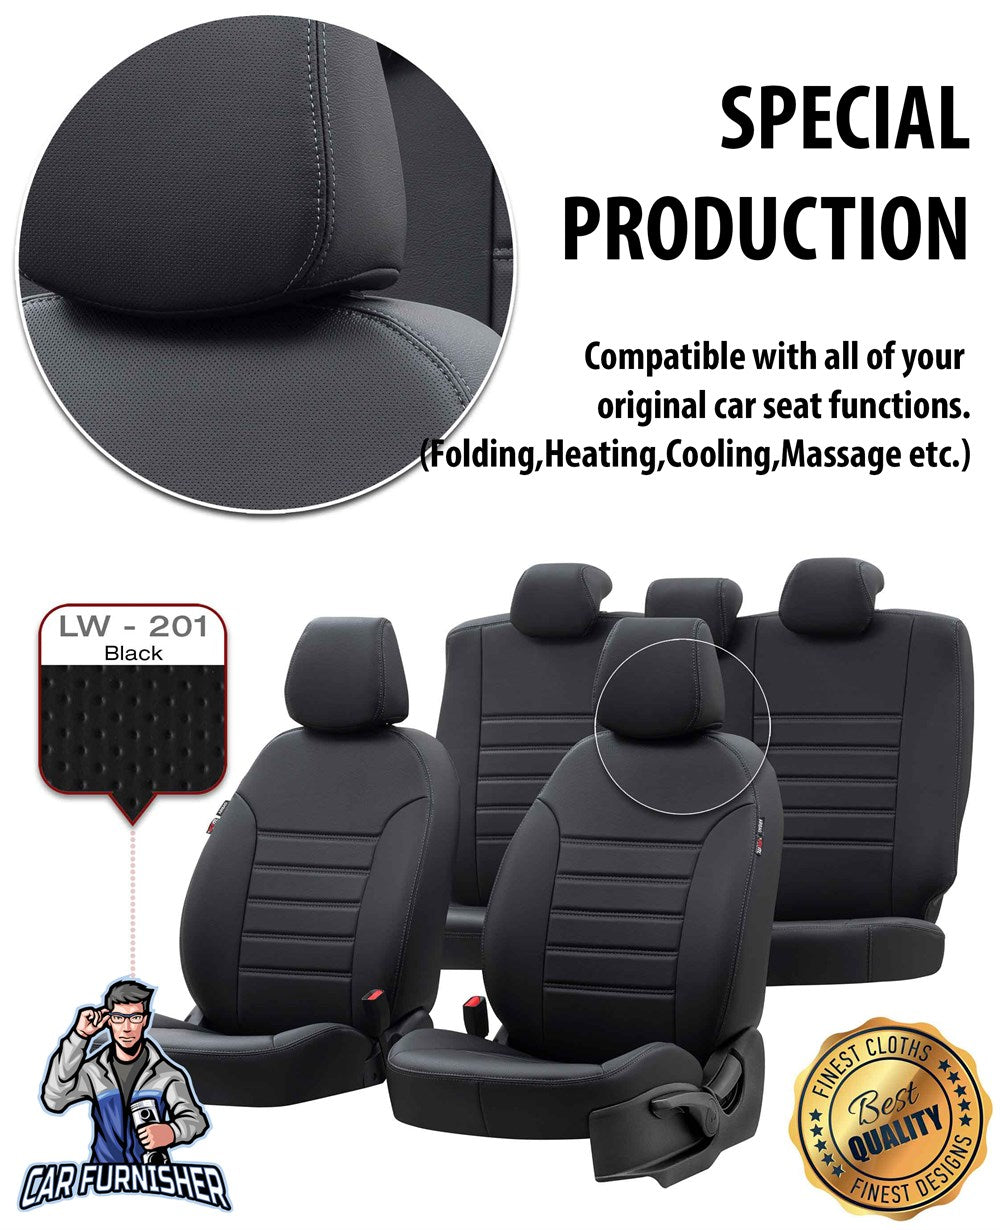 Audi Q7 Seat Cover Istanbul Leather Design Smoked Leather